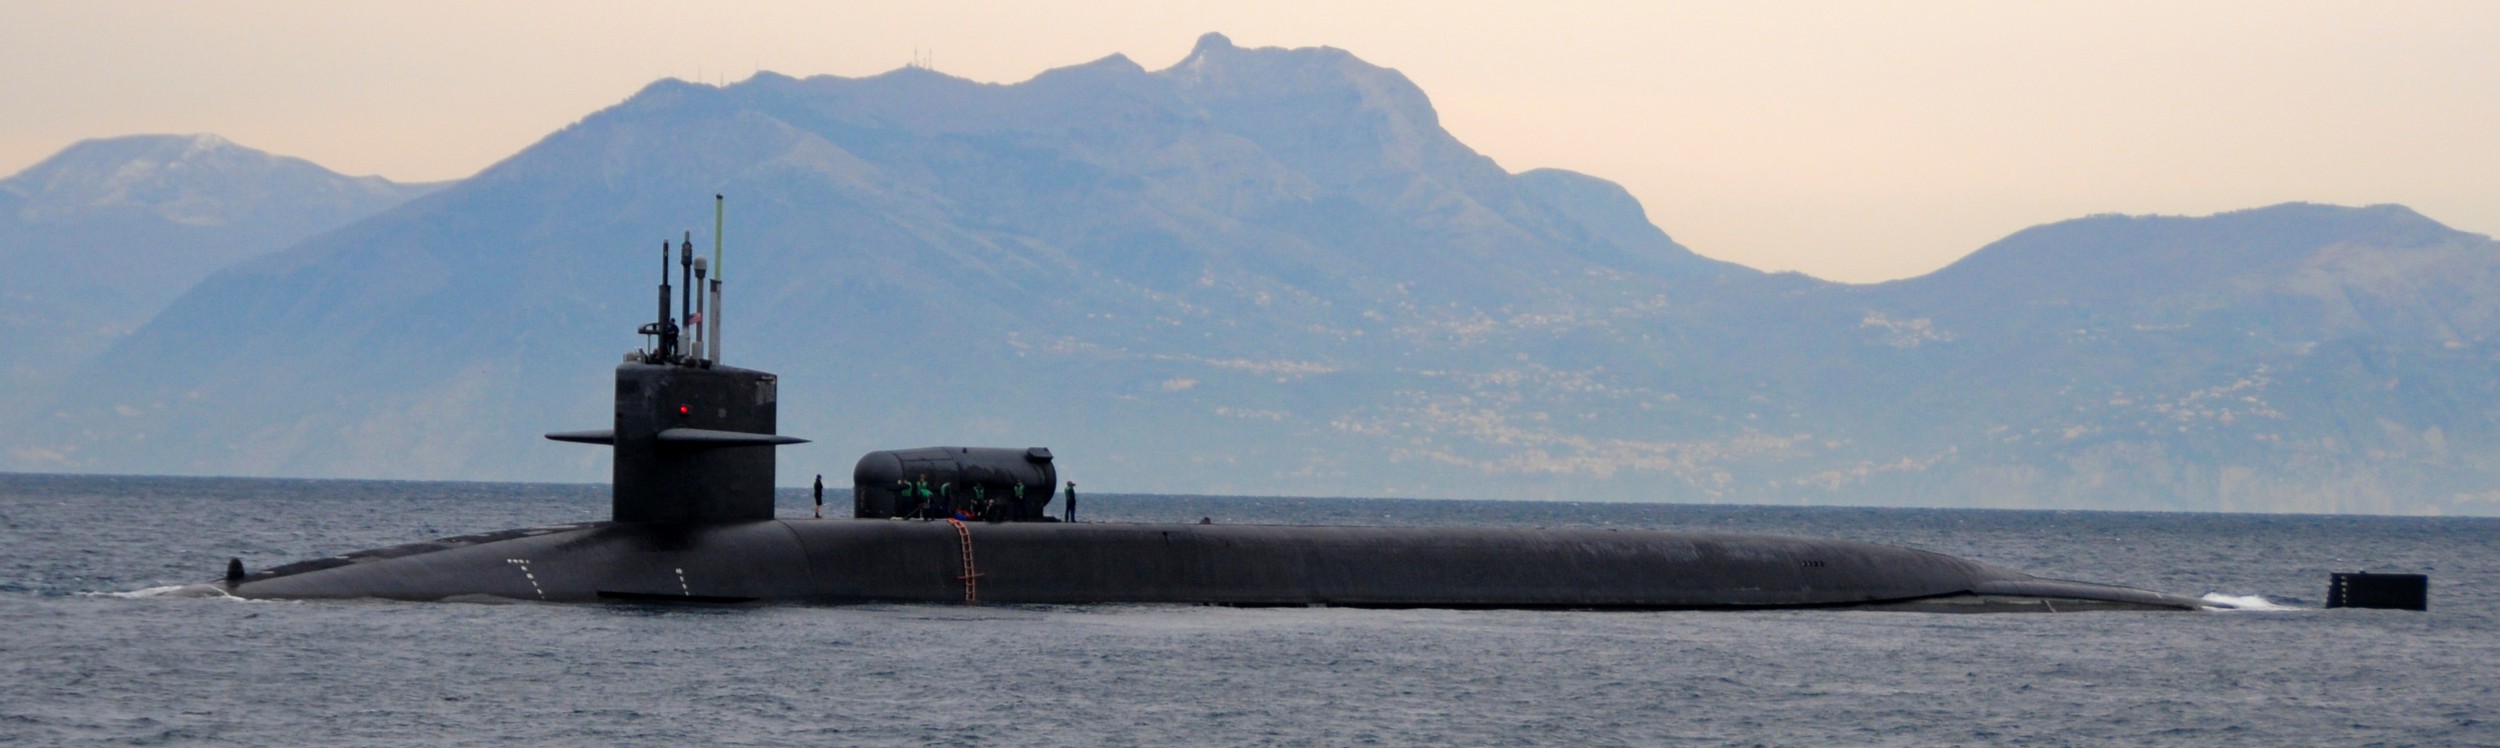 ssgn-728 uss florida guided missile submarine us navy 2011 25 naples italy